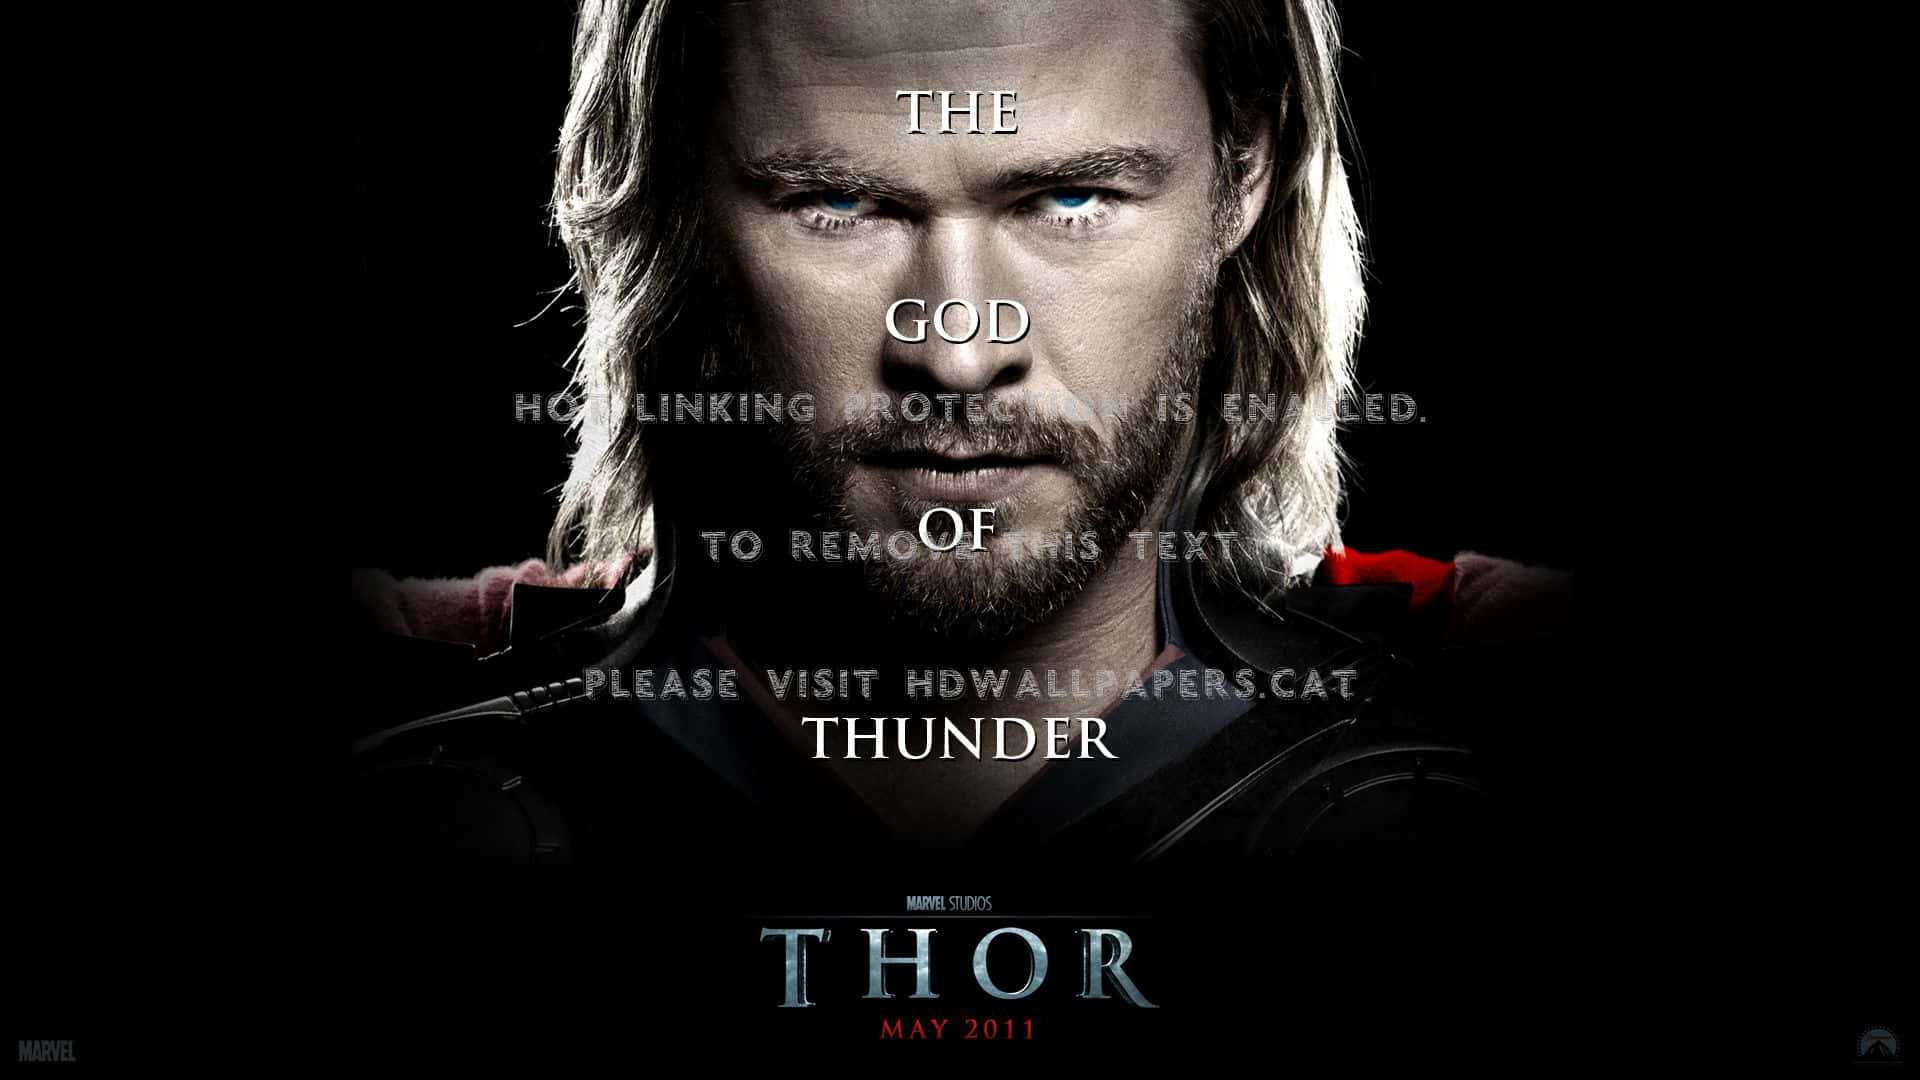 "The God of Thunder stands ready to face any challenge!" Wallpaper